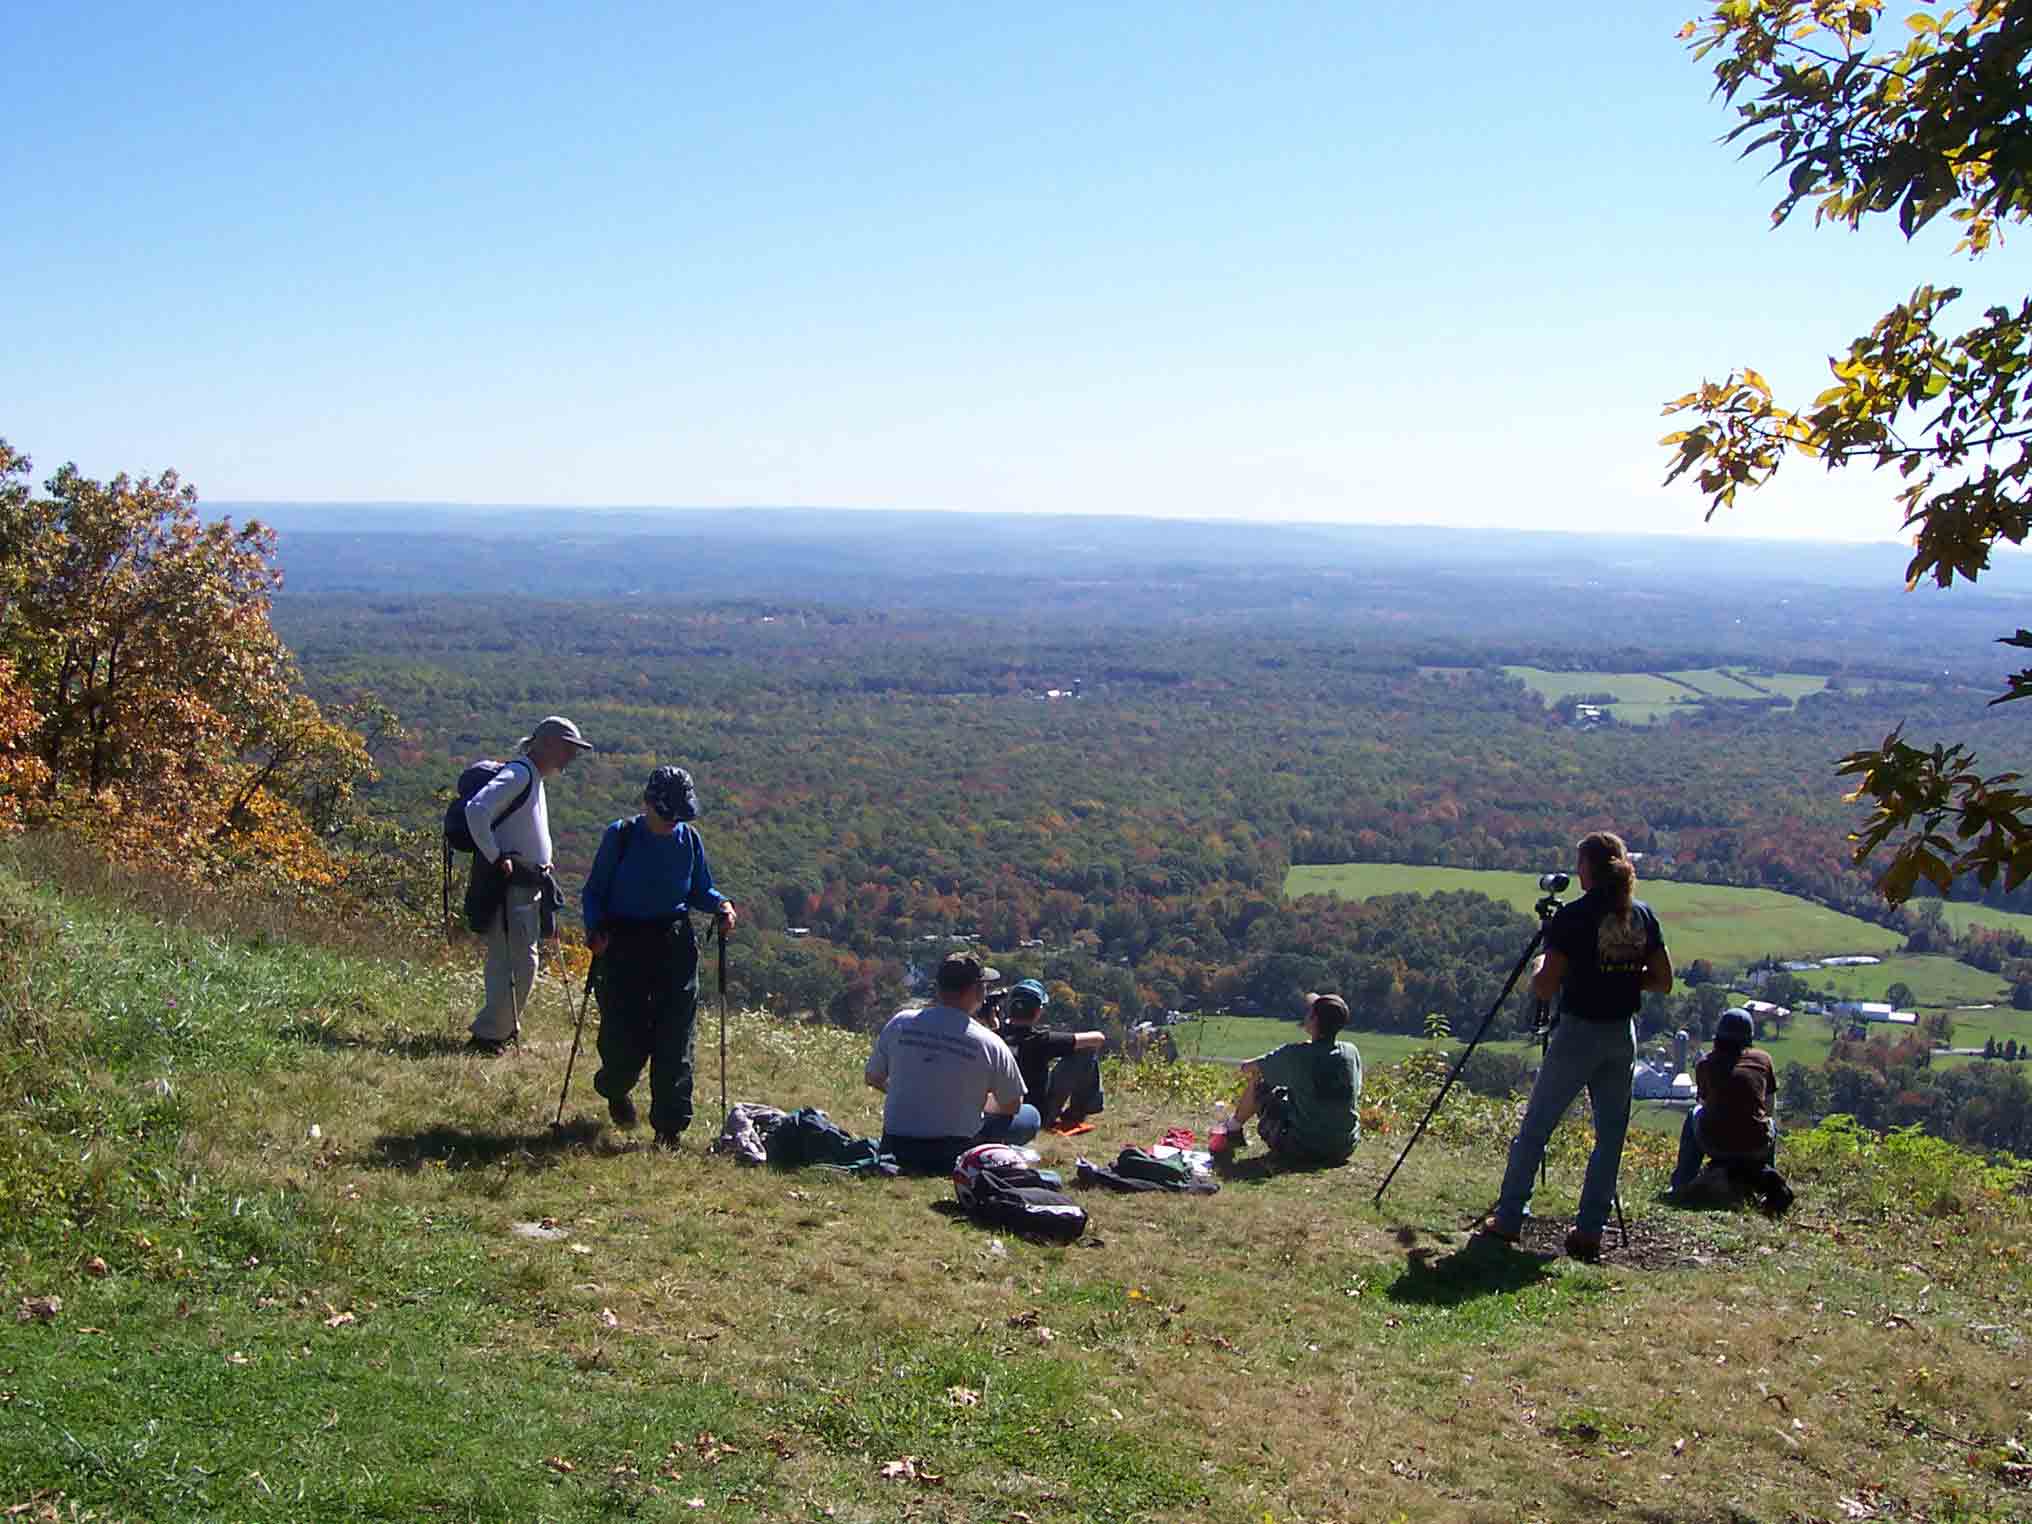 mm 6.4 - Barry and Marsha and a group of bird watchers admiring view to south from end of "grassy road" north of Kirkridge Shelter.  Courtesy dlcul@conncoll.edu